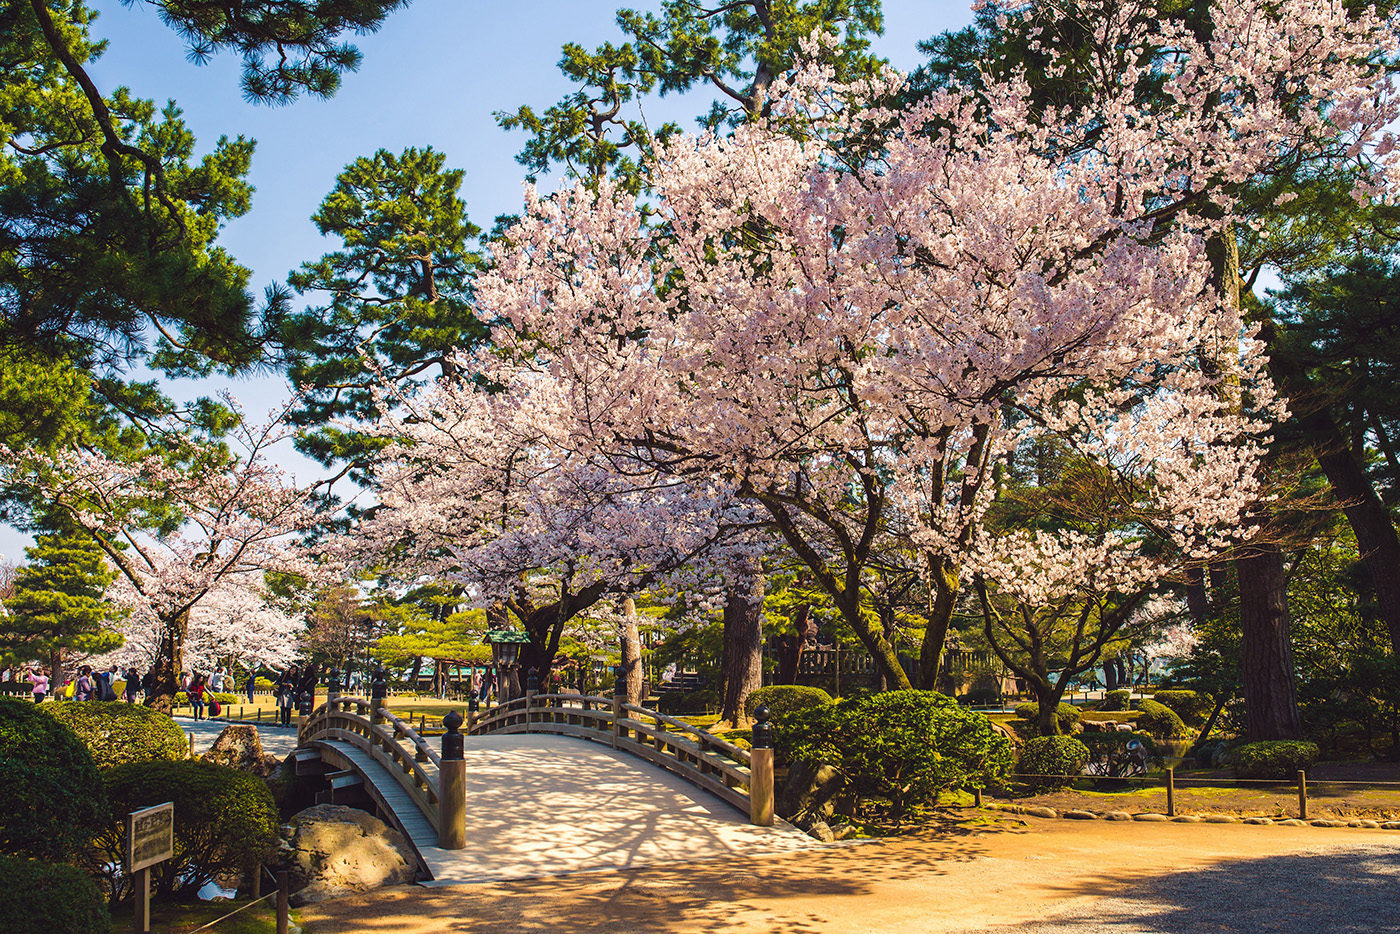 Explore cherry blossom spots, tea houses and groves of twisted ancient trees in Kanazawa